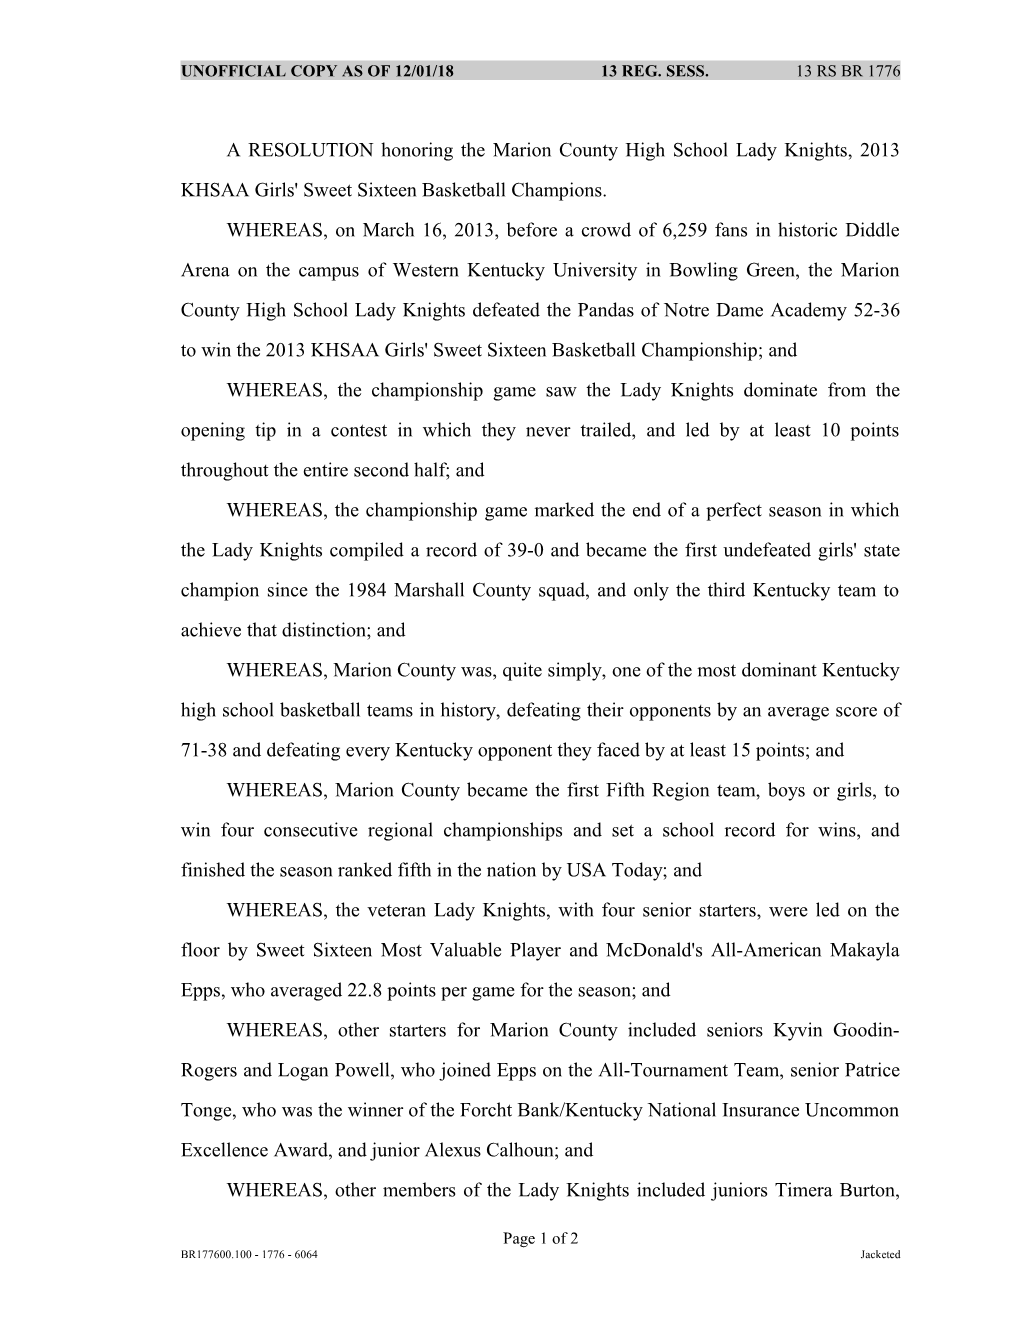 A RESOLUTION Honoring the Marion County High School Lady Knights, 2013 KHSAA Girls' Sweet